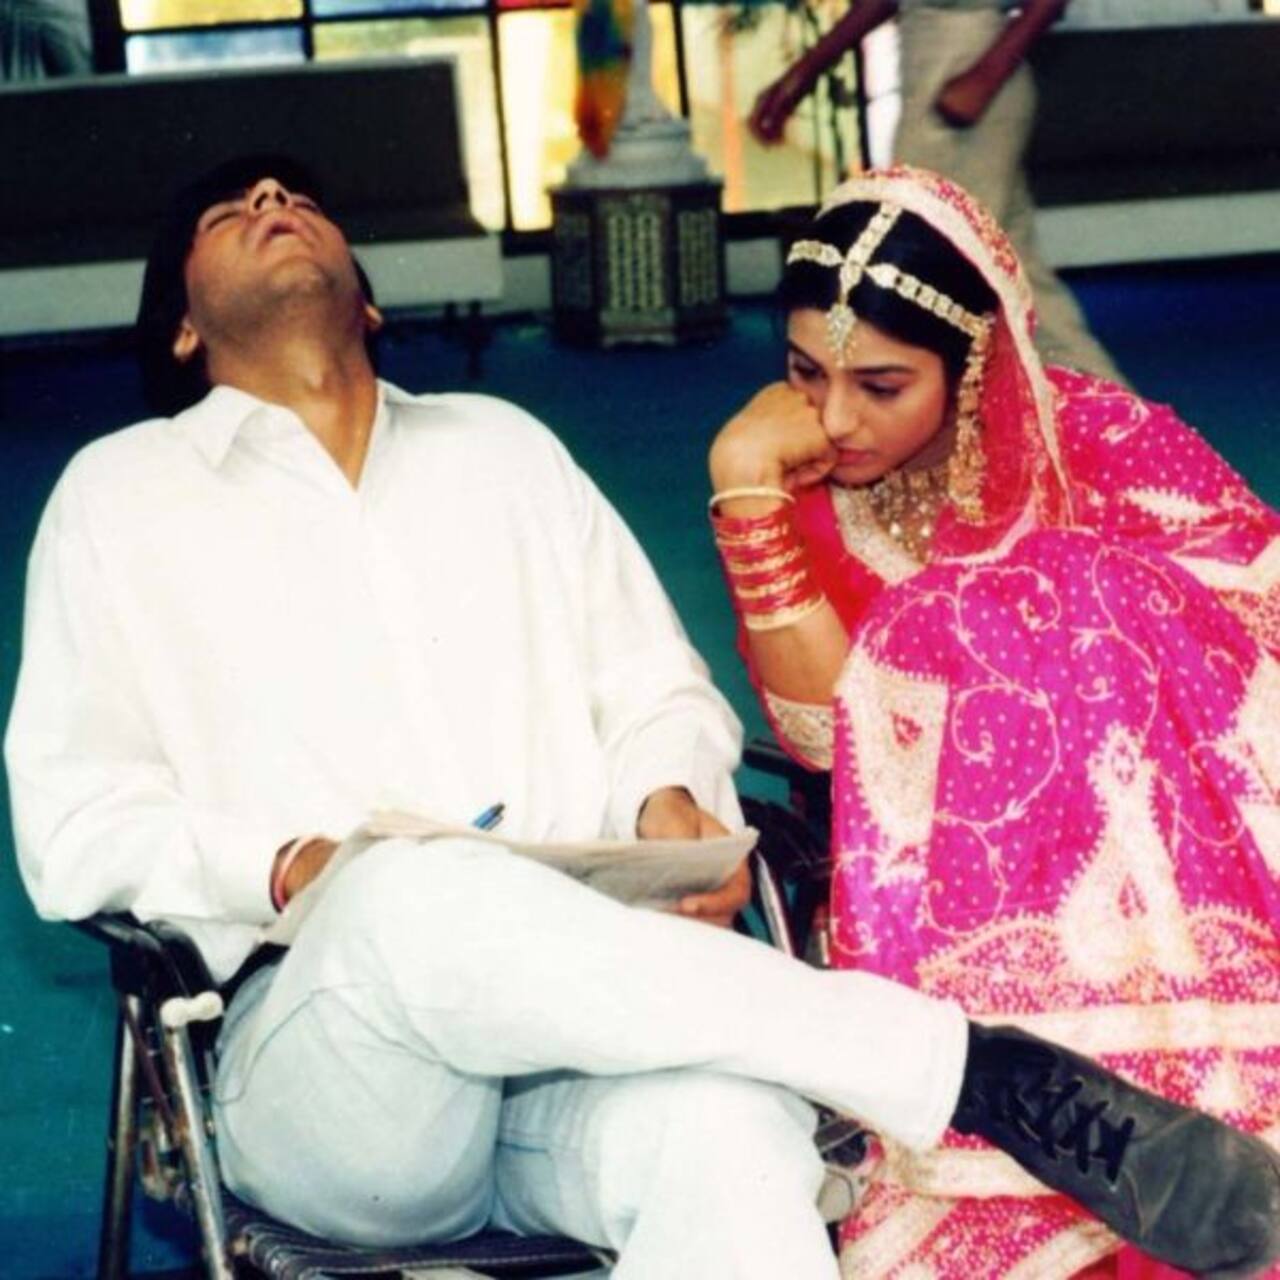 Ajay Devgn proves with this throwback picture featuring Tabu that his sense of humour is just getting better